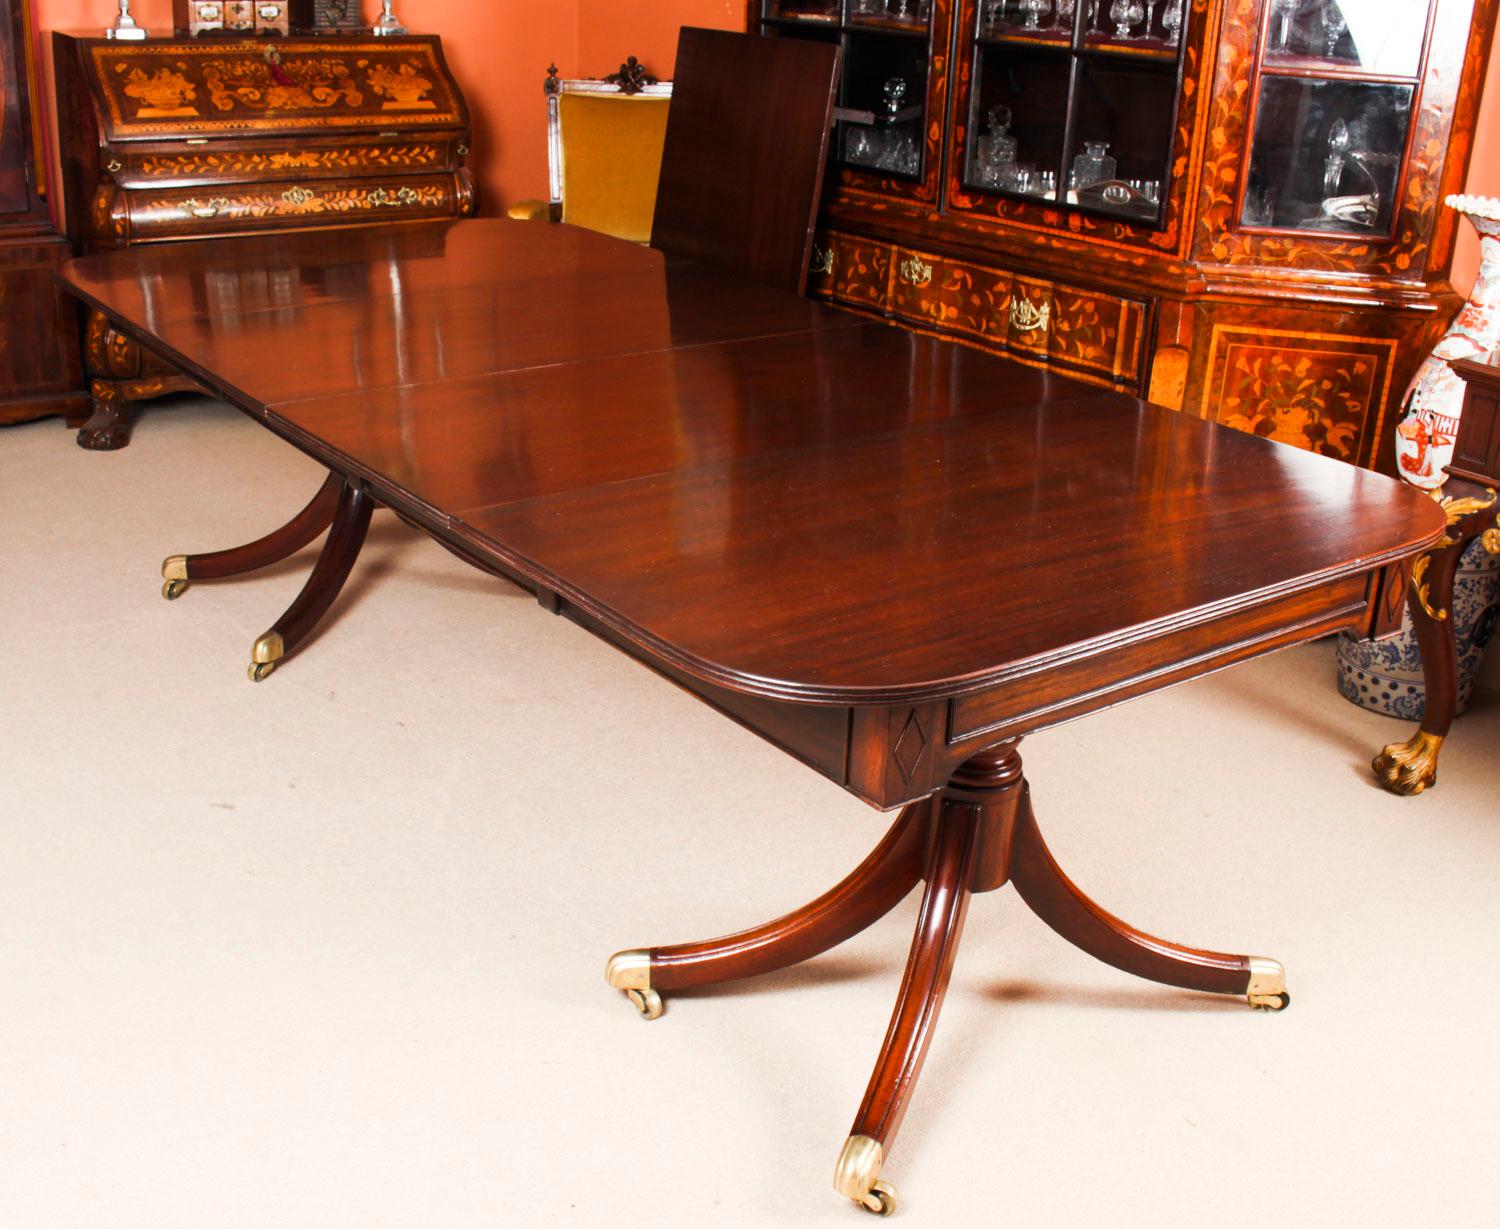 Early 19th Century Antique Twin Pillar Regency Dining Table and 10 Regency Chairs, 19th Century